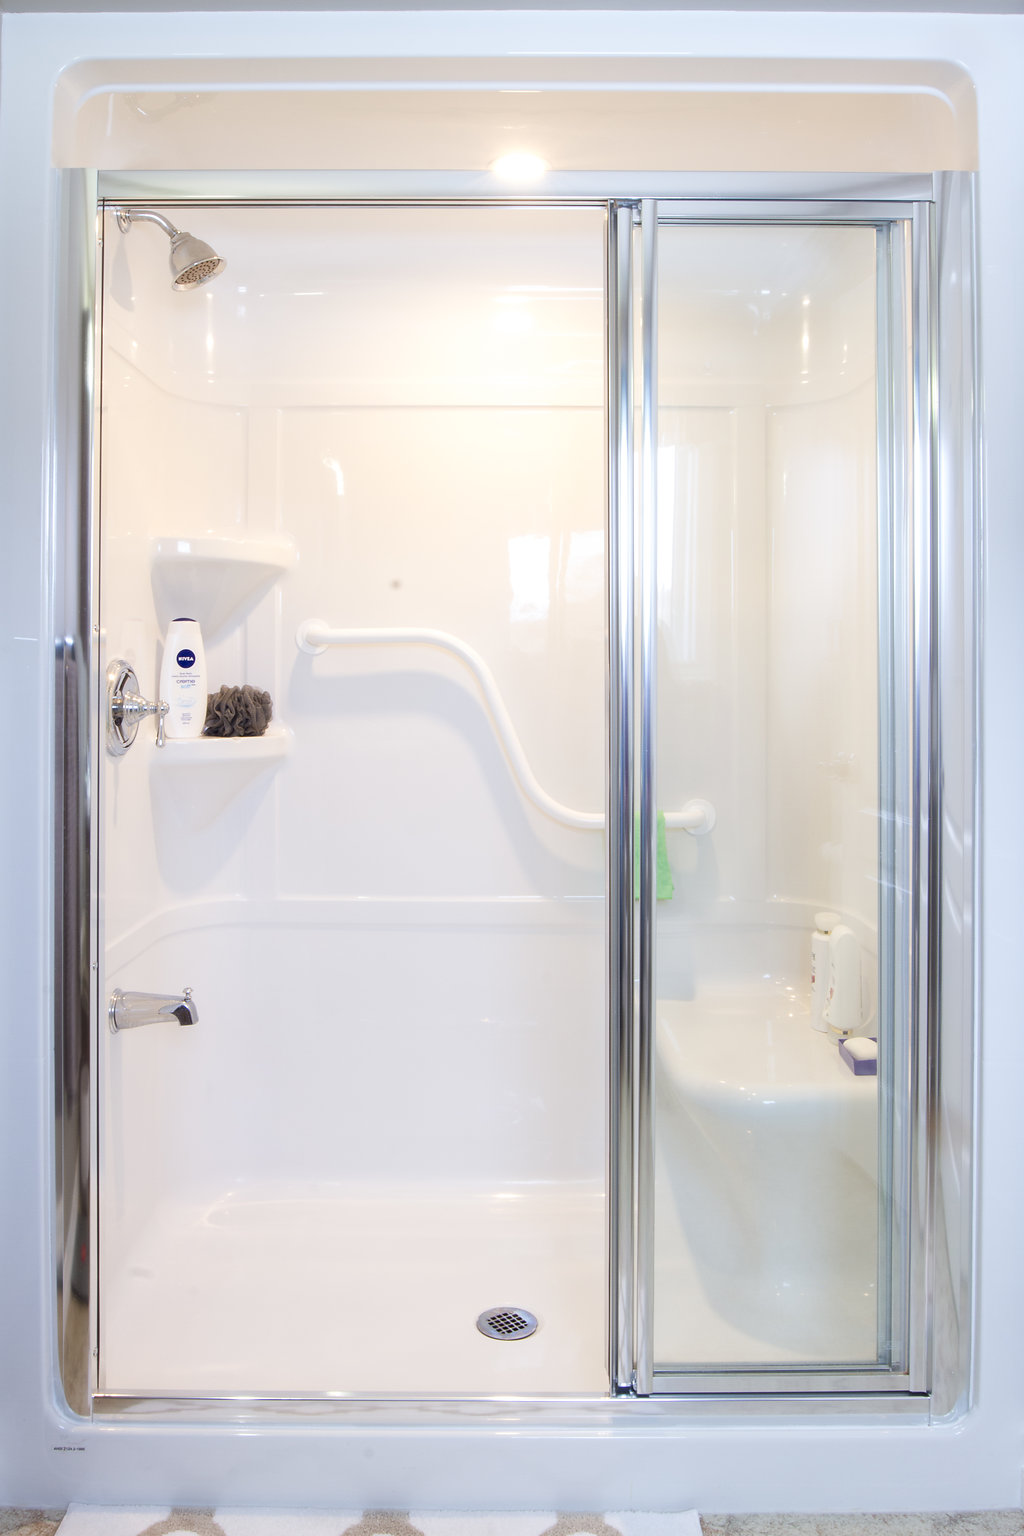 Walk-In Accessibility Shower with Rail & Seat